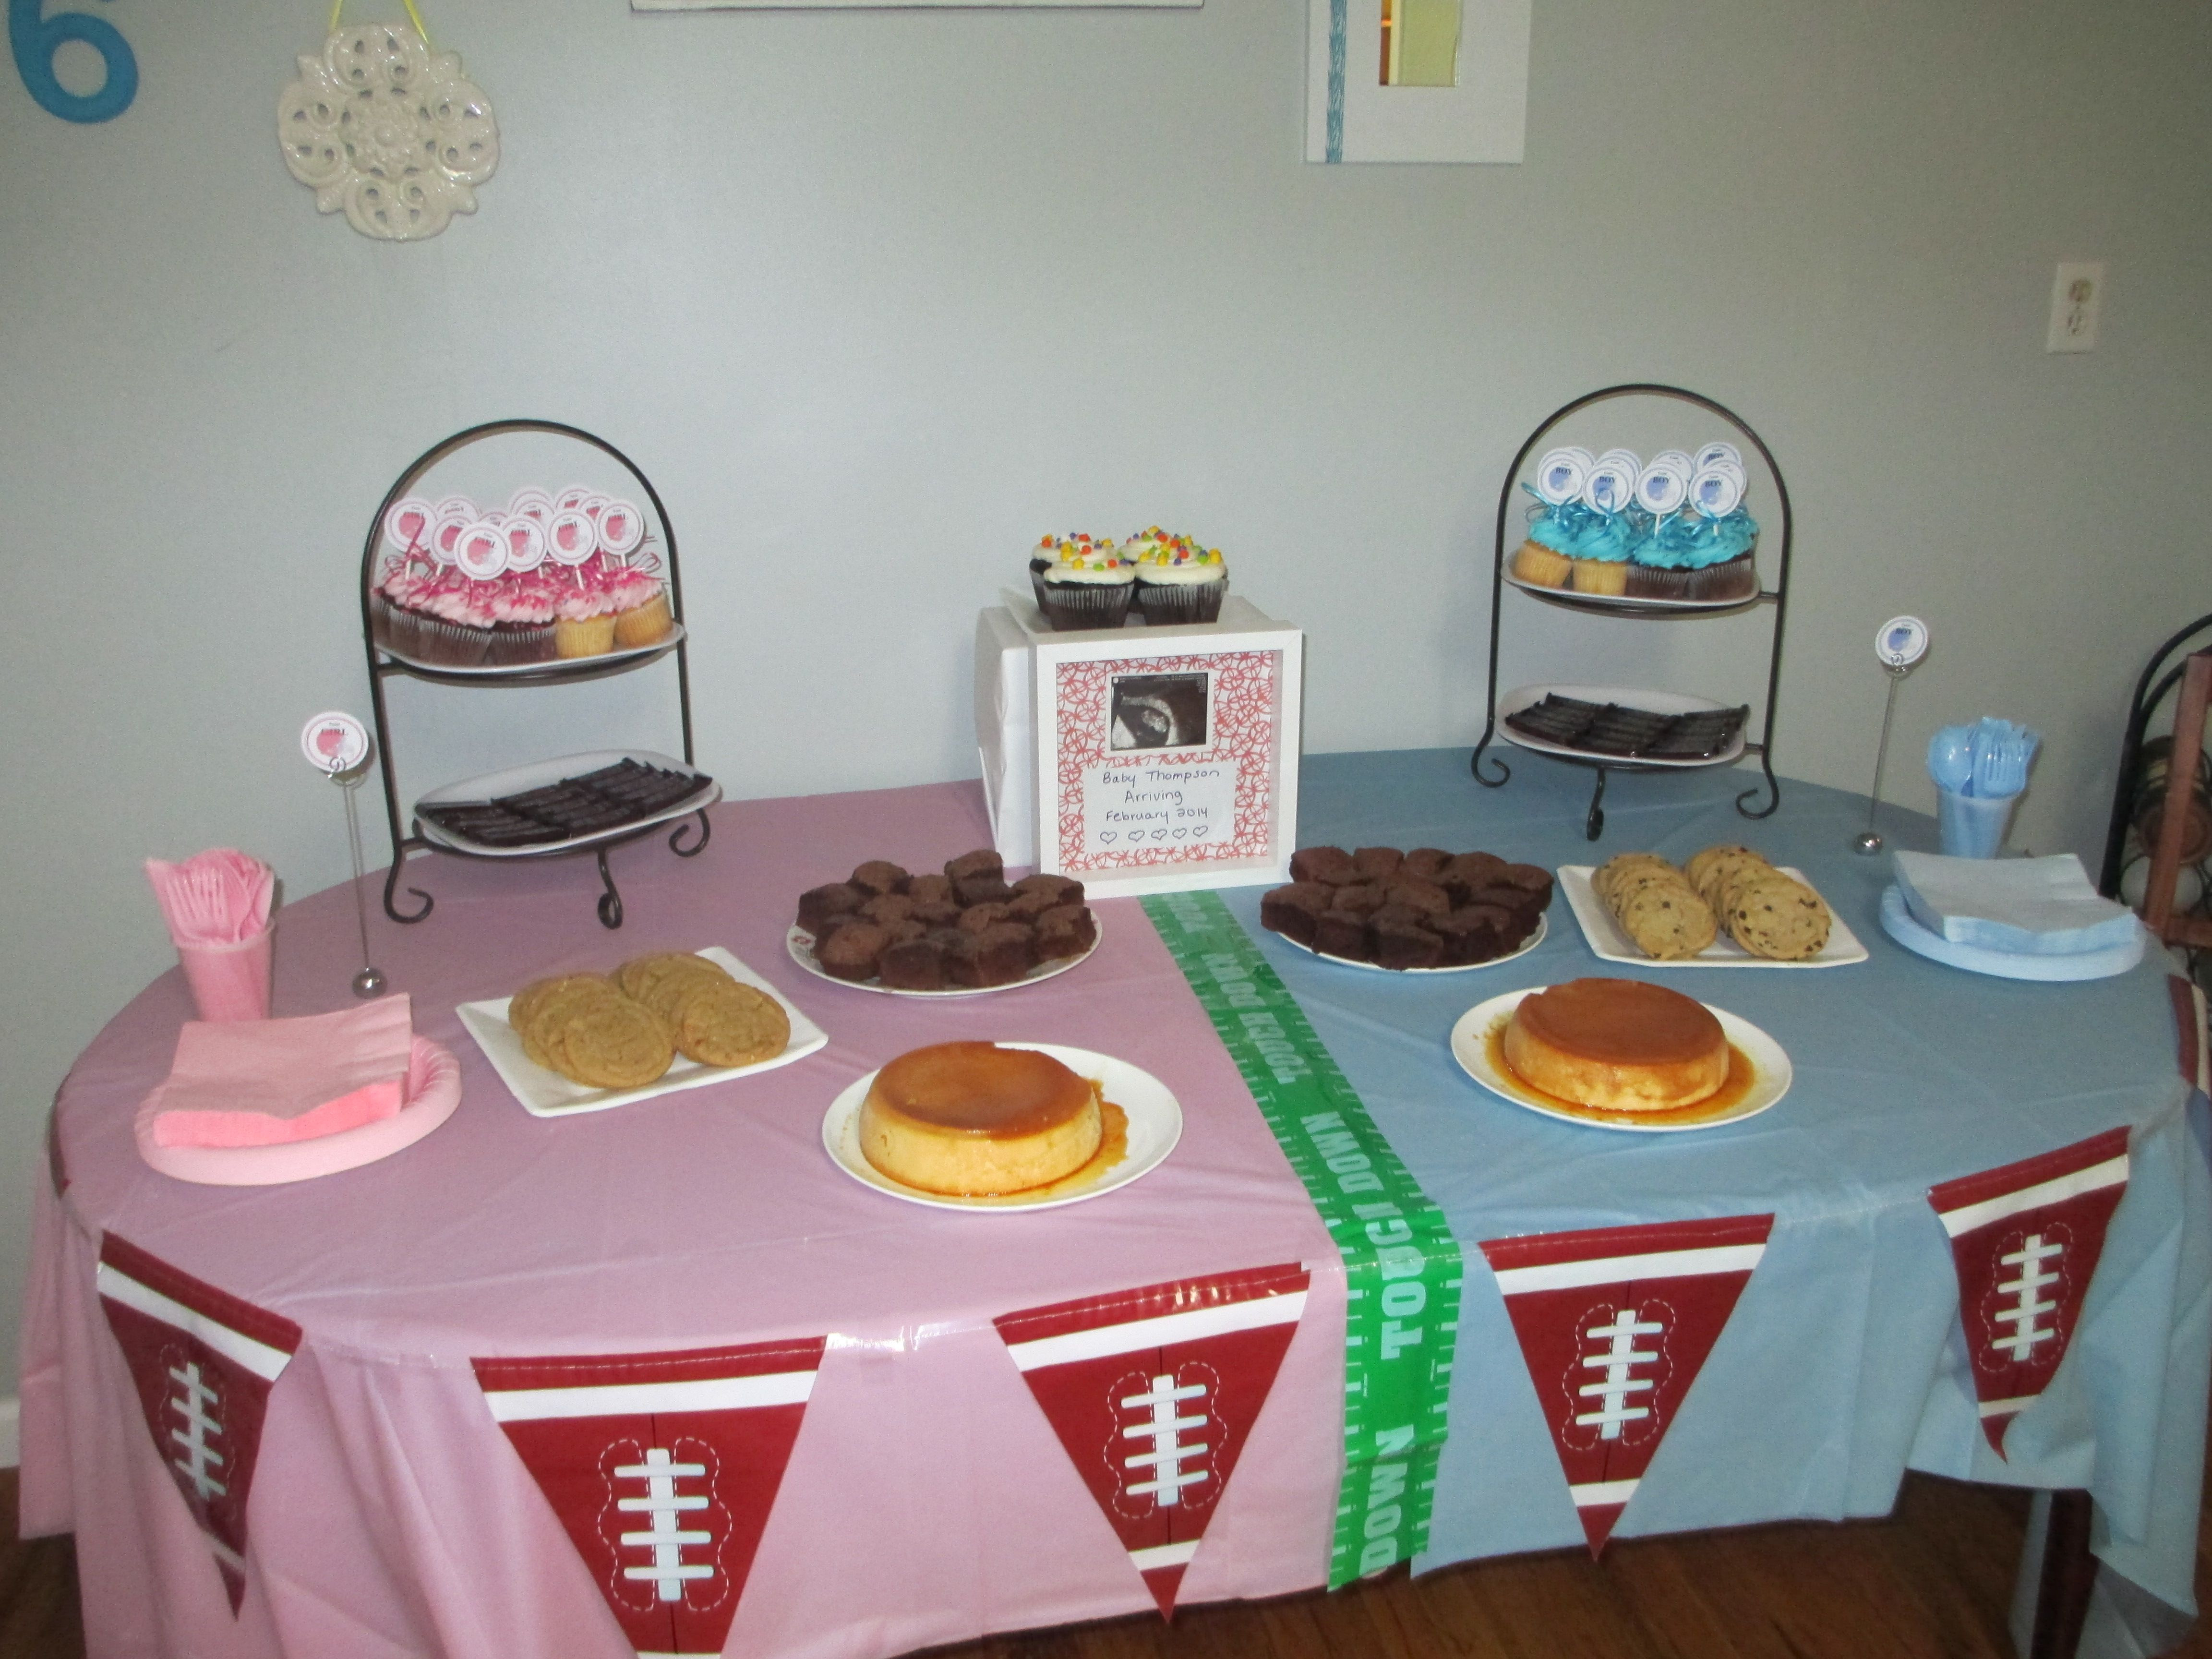 Football Gender Reveal Party Ideas
 Football themed Gender Reveal Pink VS Blue